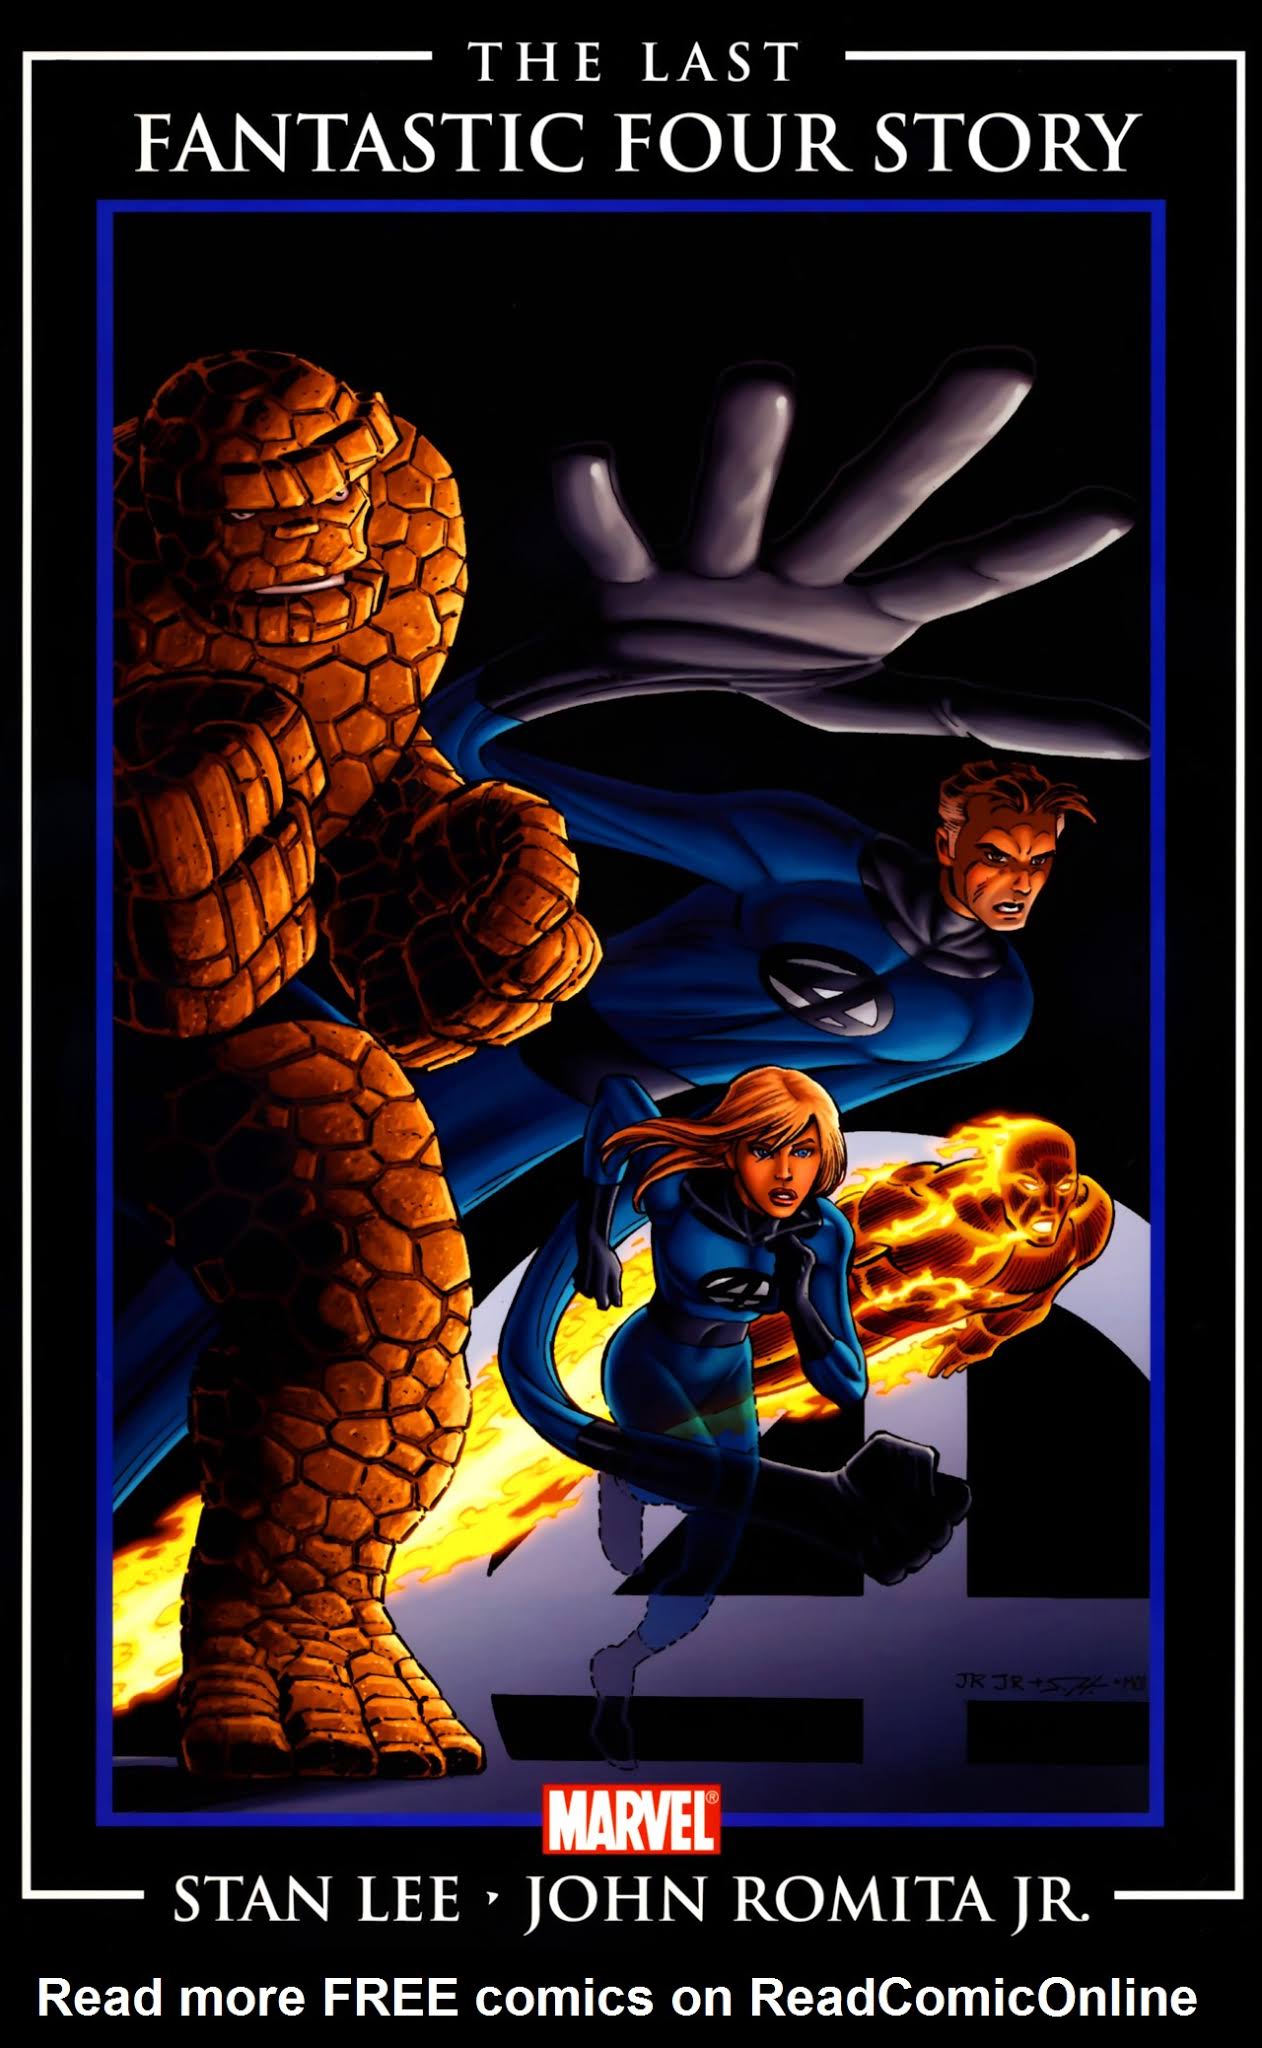 Read online The Last Fantastic Four Story comic -  Issue # Full - 1